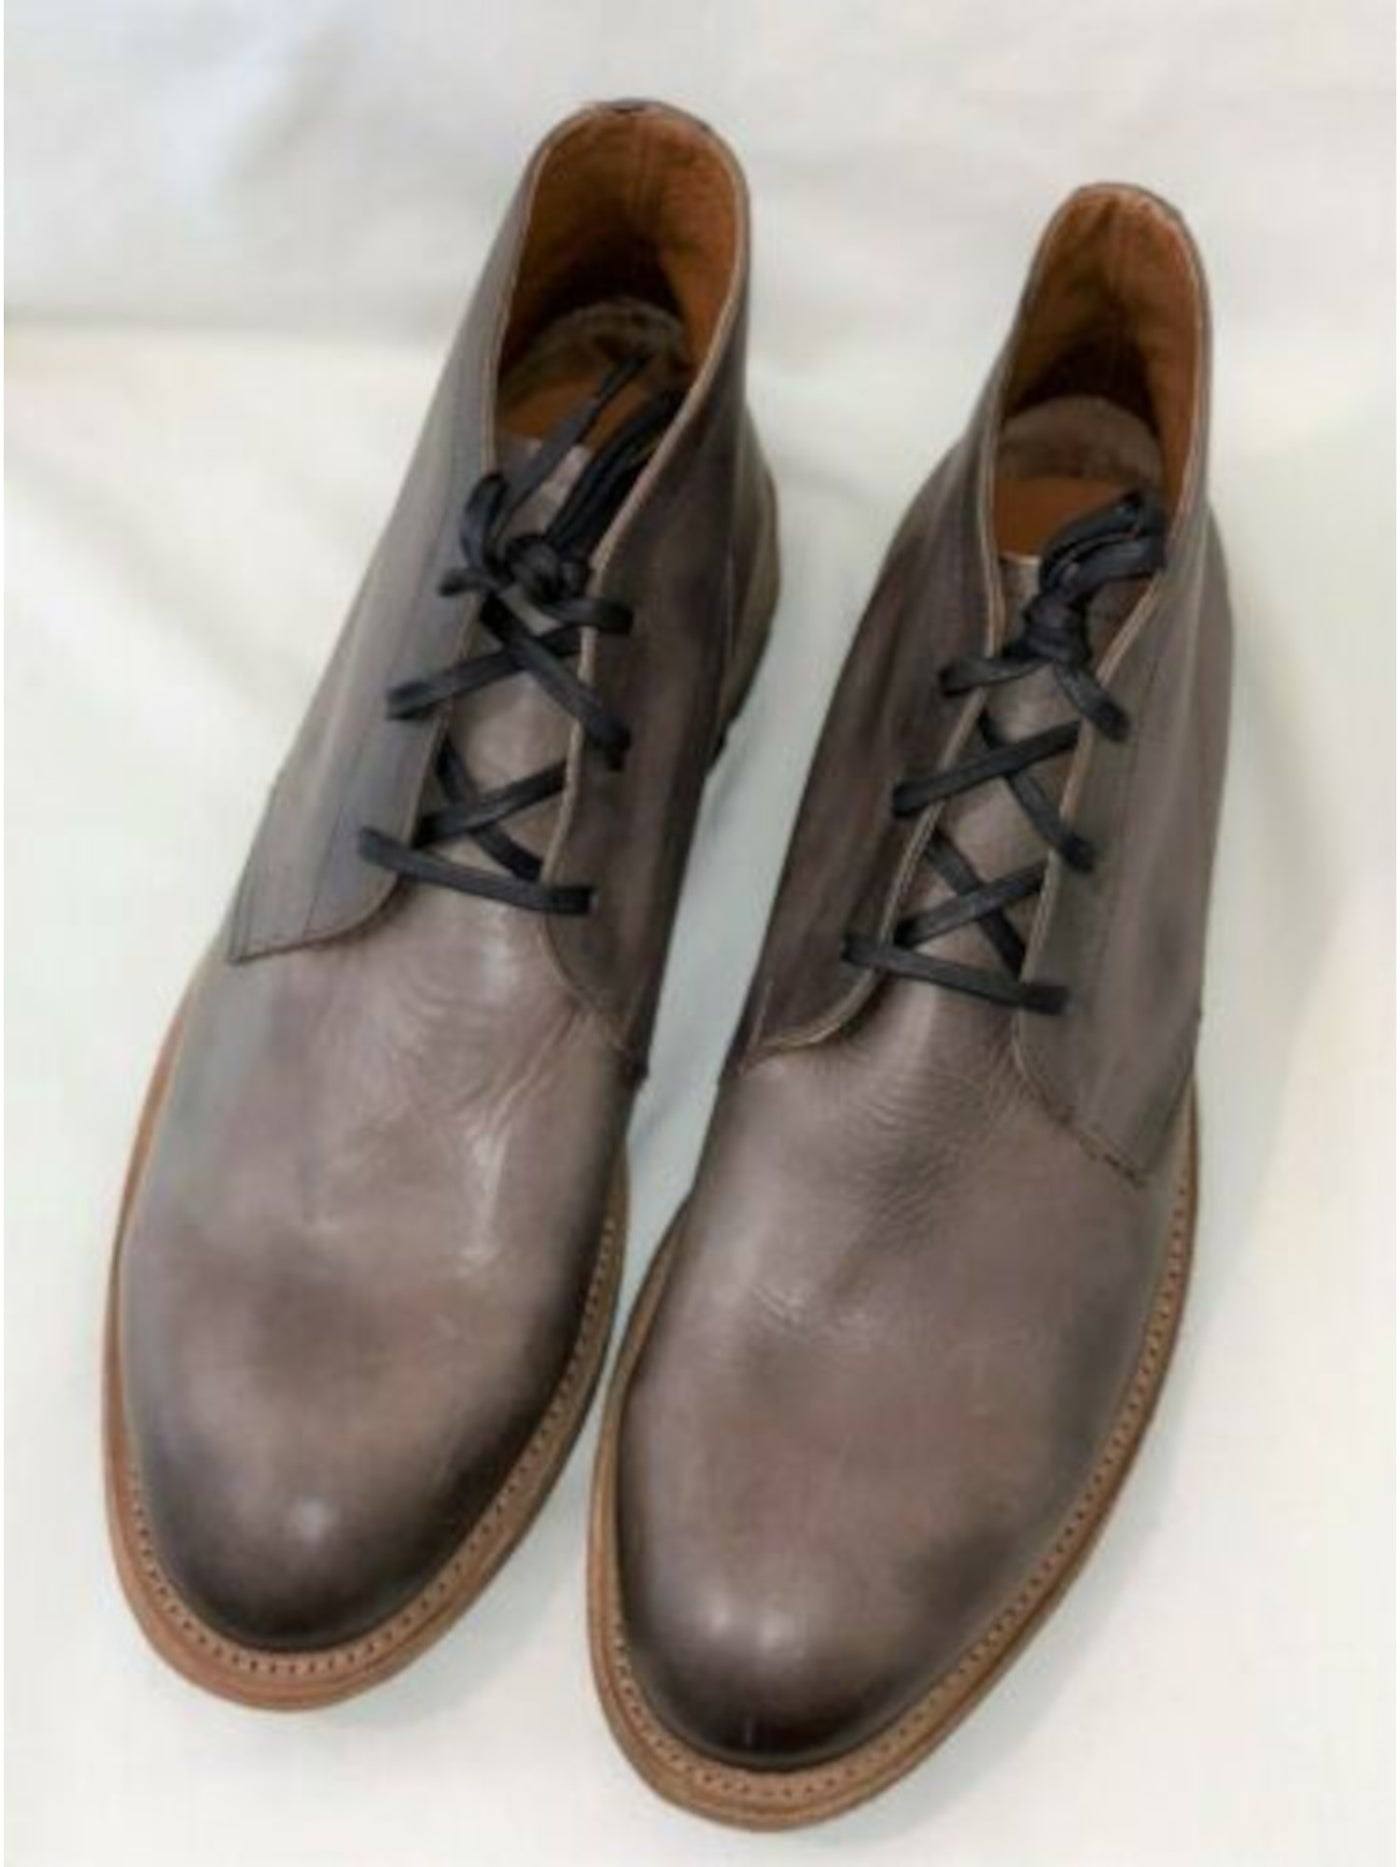 FRYE Mens Gray Comfort Bowery Round Toe Block Heel Lace-Up Leather Chukka Boots 8 M